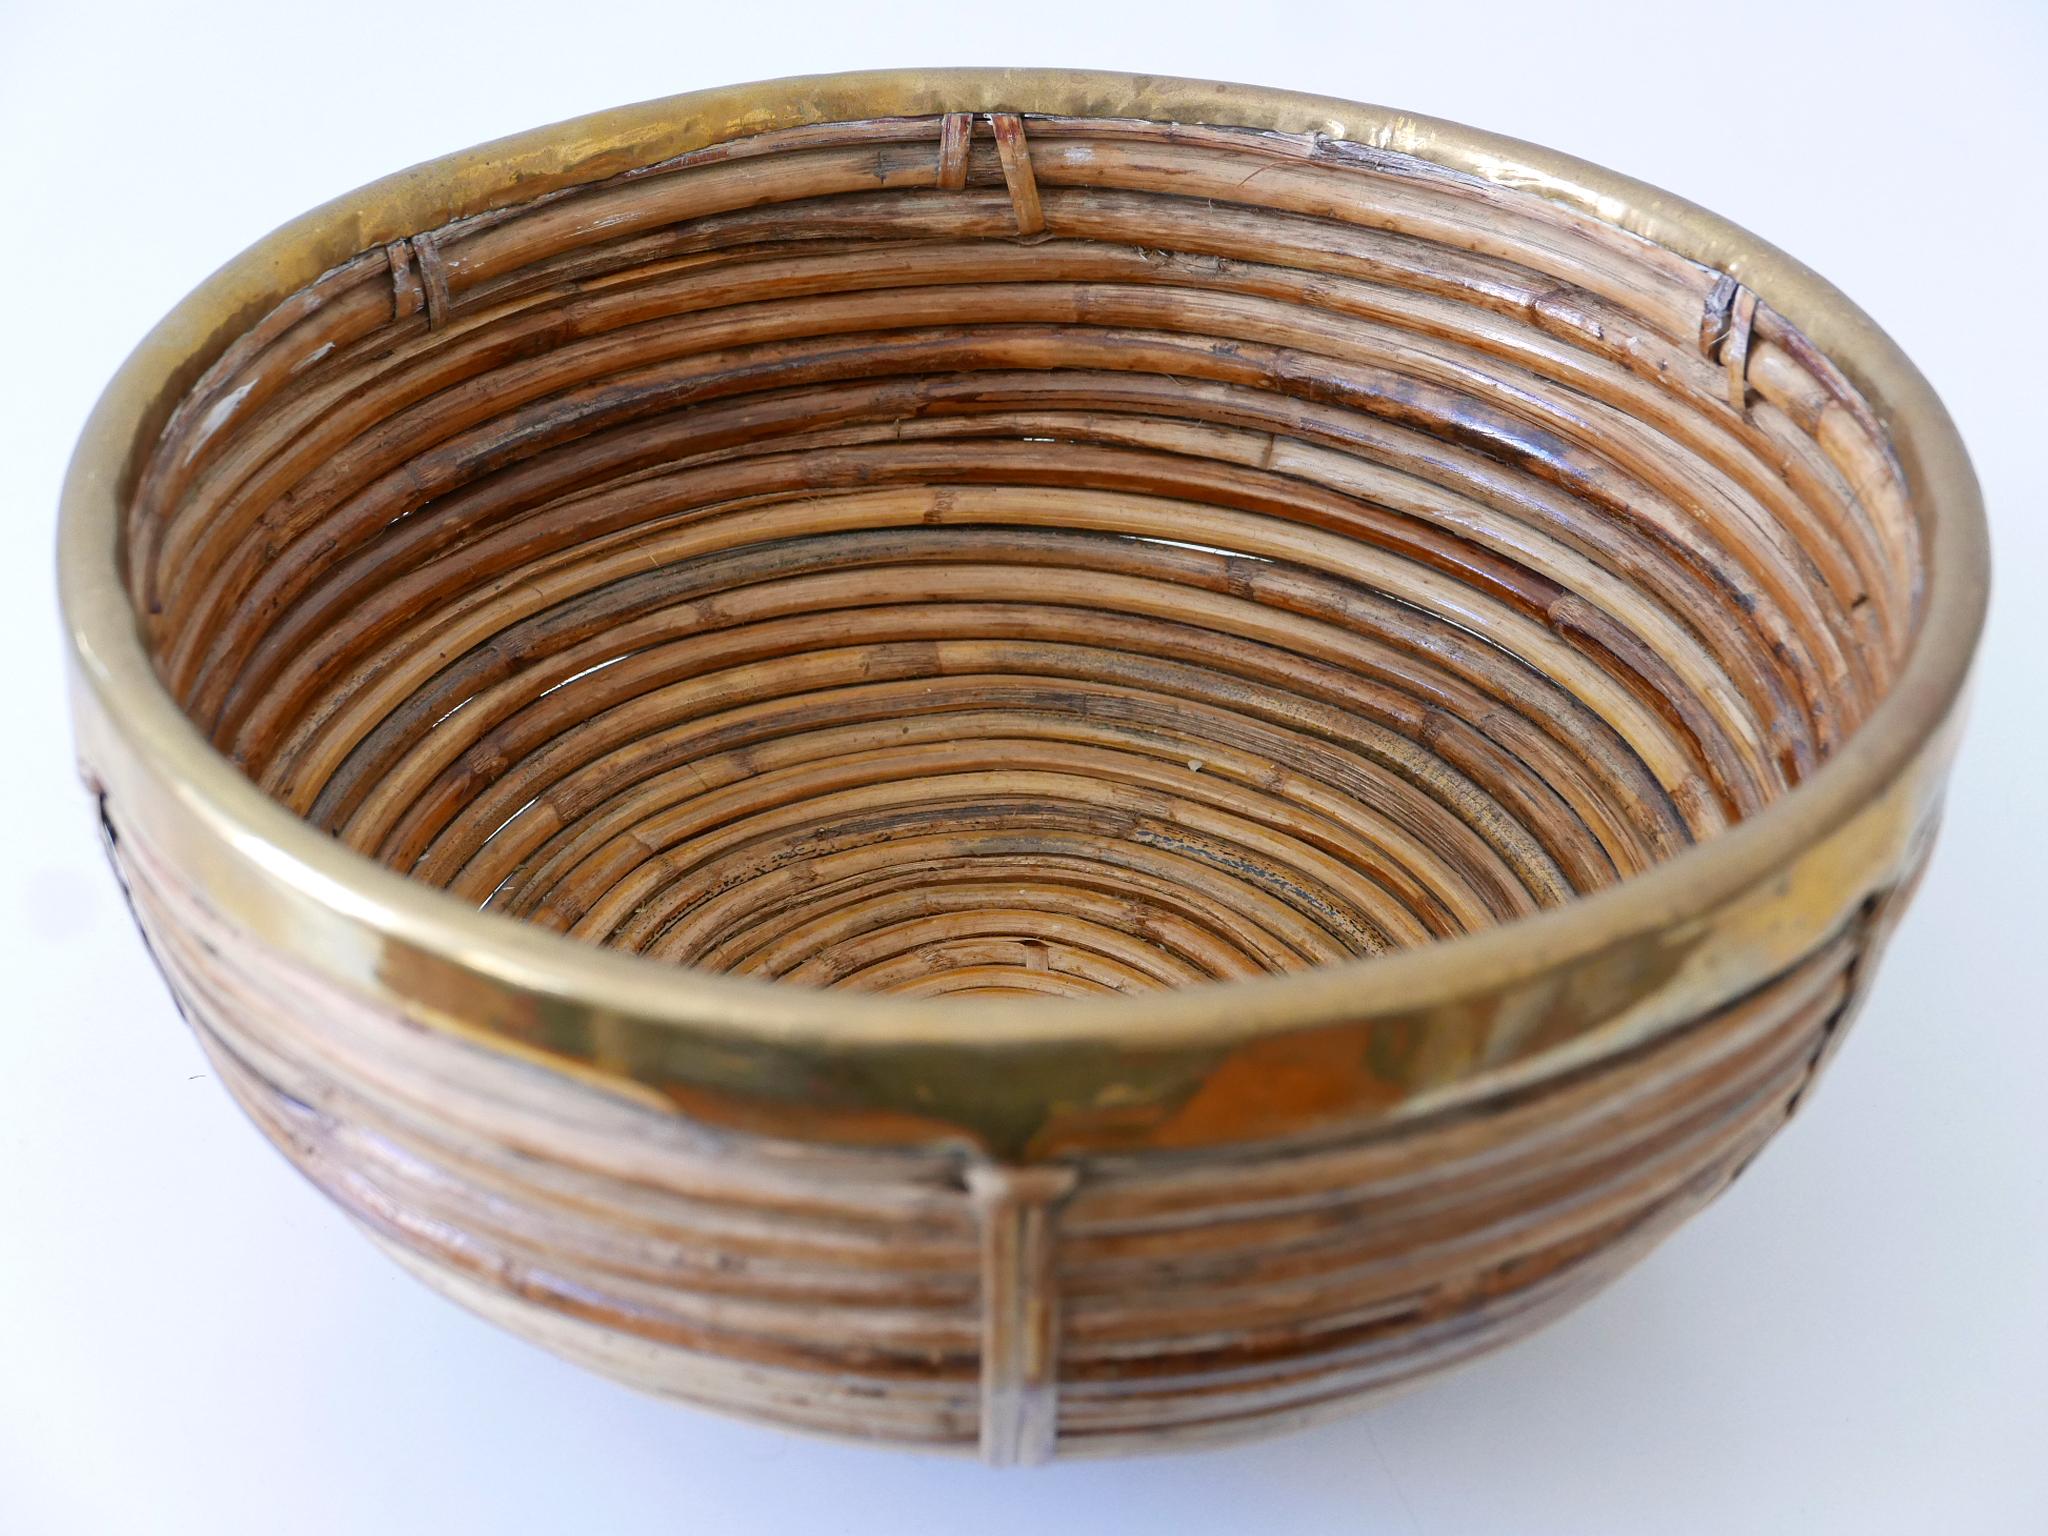 Large and highly decorative Mid-Century Modern fruit bowl or centerpiece. Handcrafted in Italy, 1960s.

Executed in rattan / bamboo and brass.

Dimensions: 
Dm 14.96 (38 cm)
H 7.48 (19 cm)

Good original overall condition. Min. wear consistent with